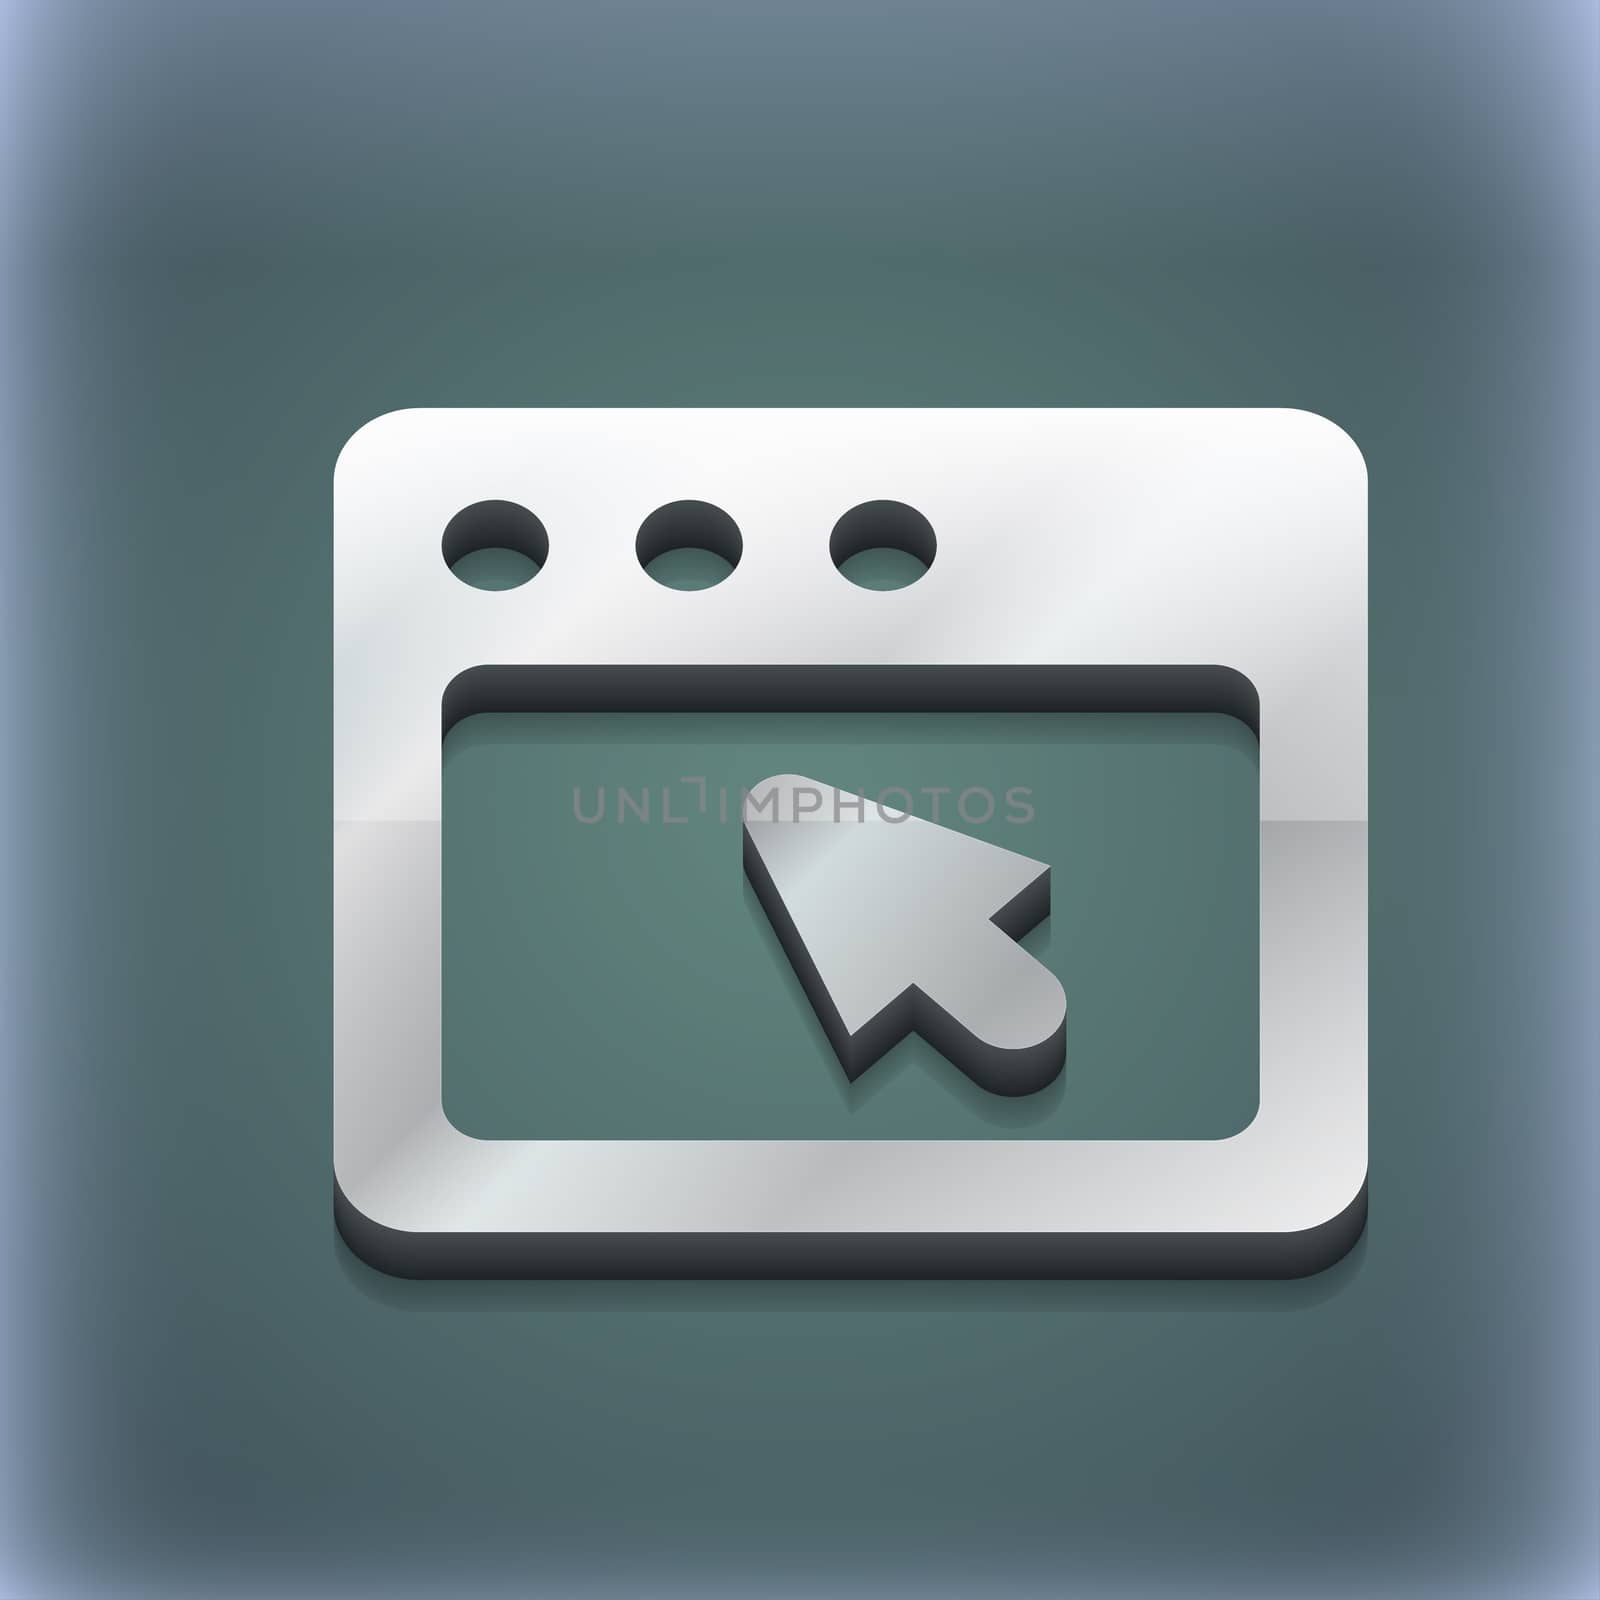 the dialog box icon symbol. 3D style. Trendy, modern design with space for your text illustration. Raster version